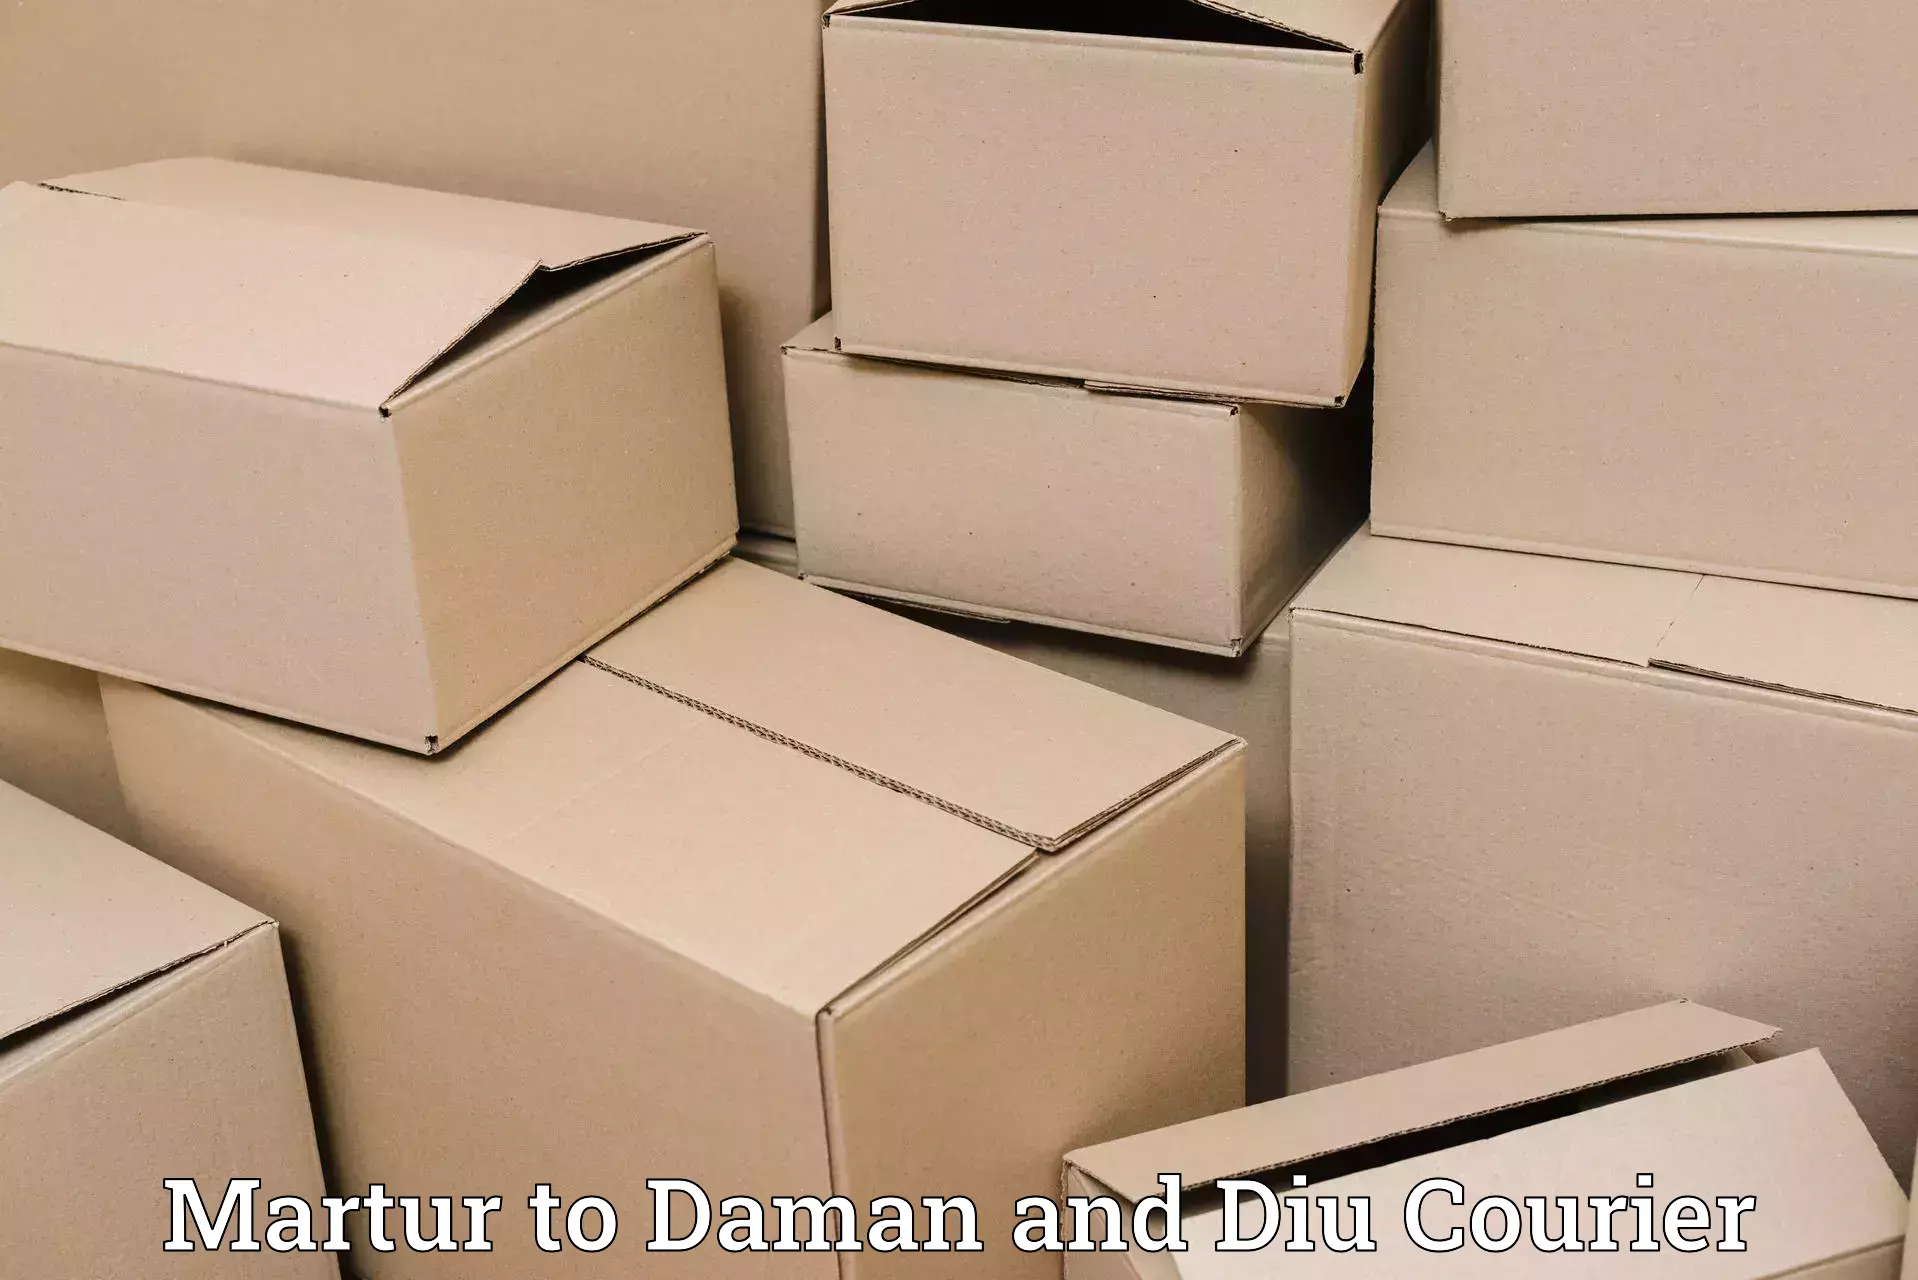 Reliable delivery network Martur to Daman and Diu